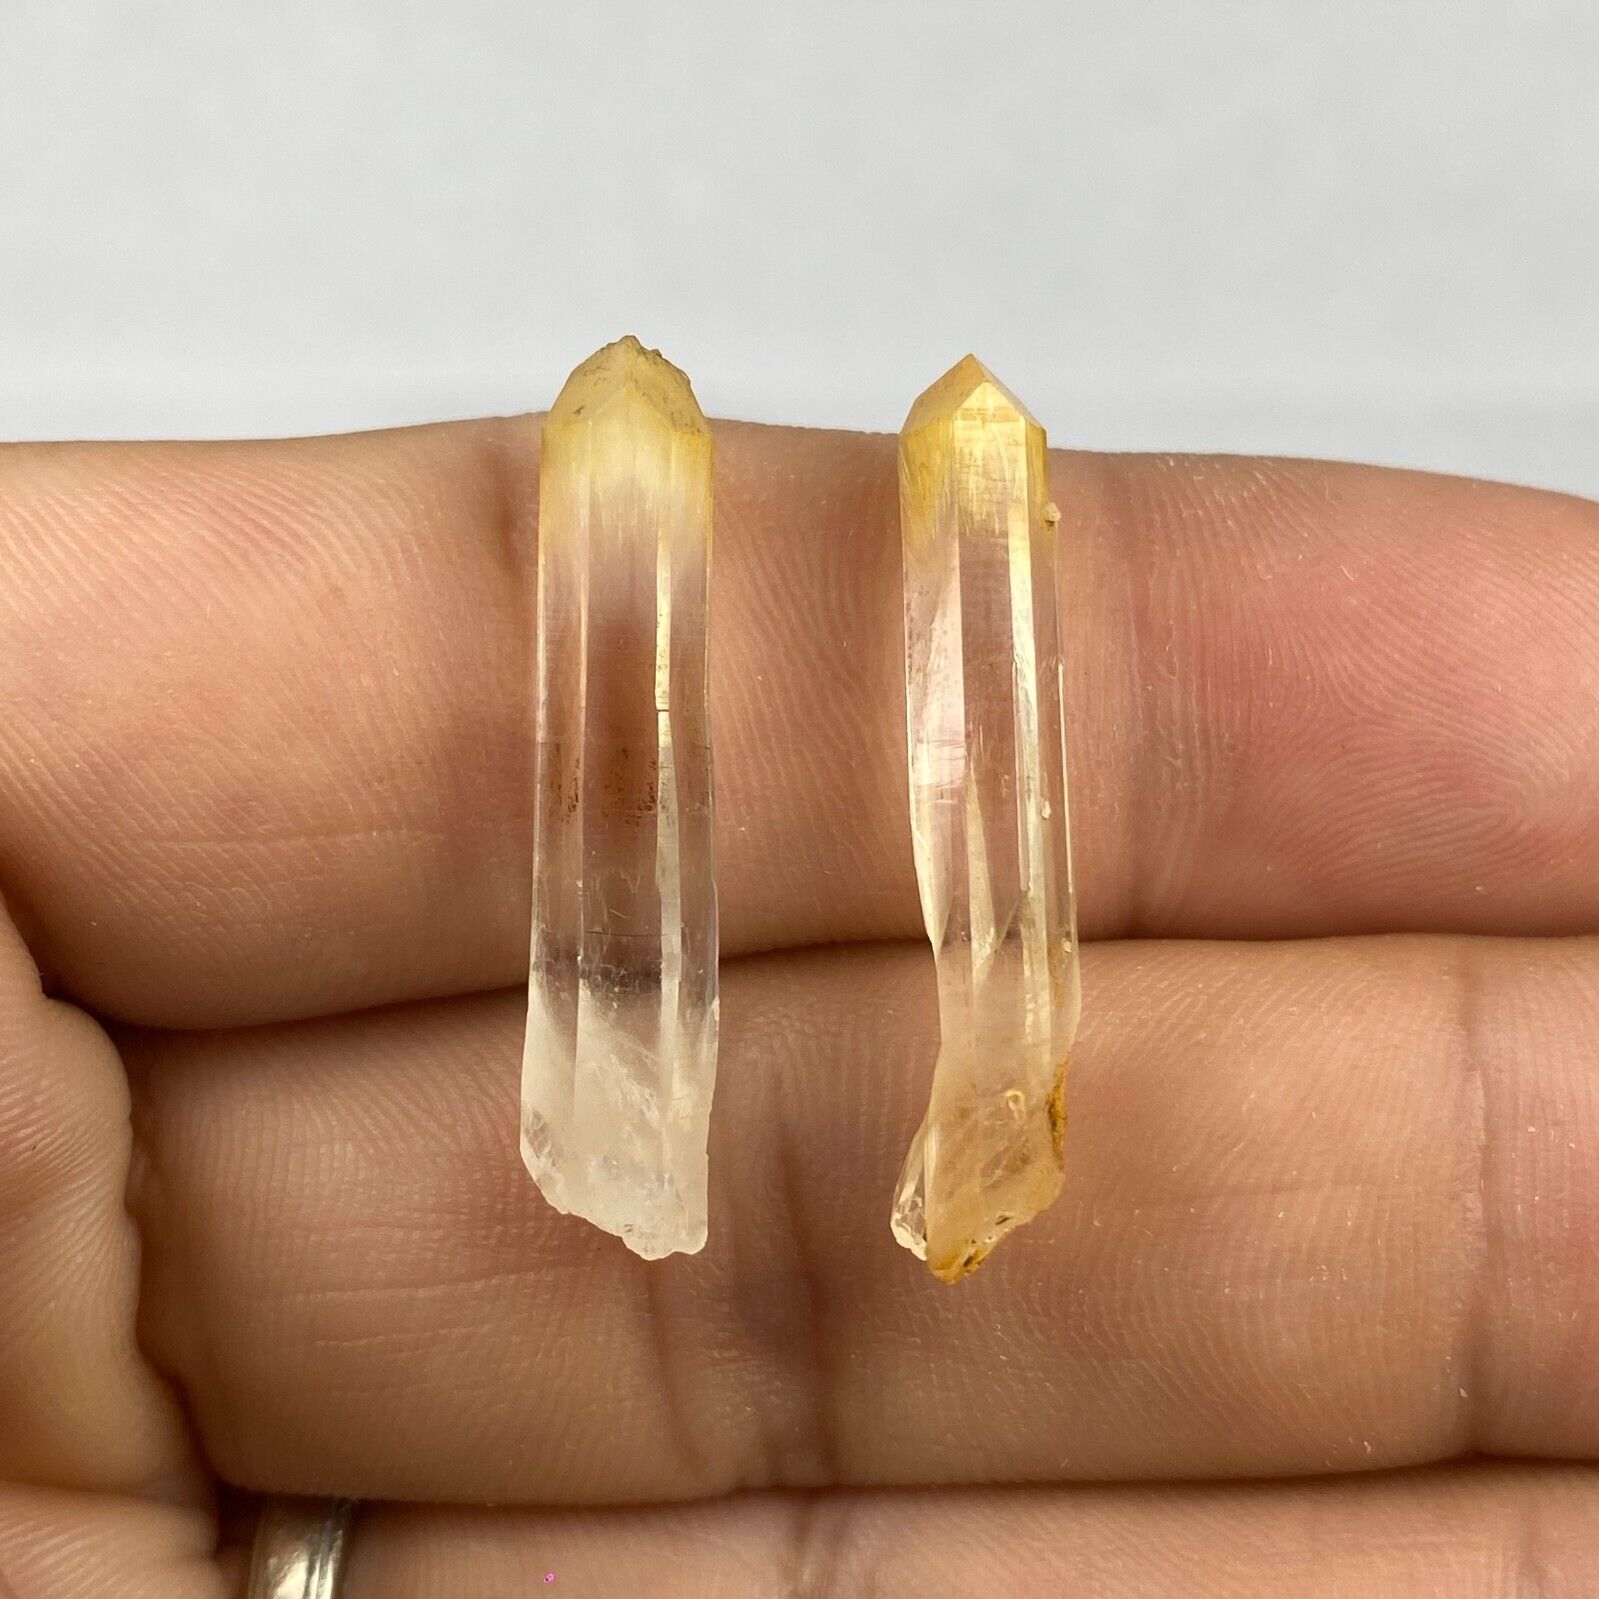 LOT OF 2 MANGO QUARTZ CRYSTAL FROM COLOMBIA 3.06 grams / 0.108 oz